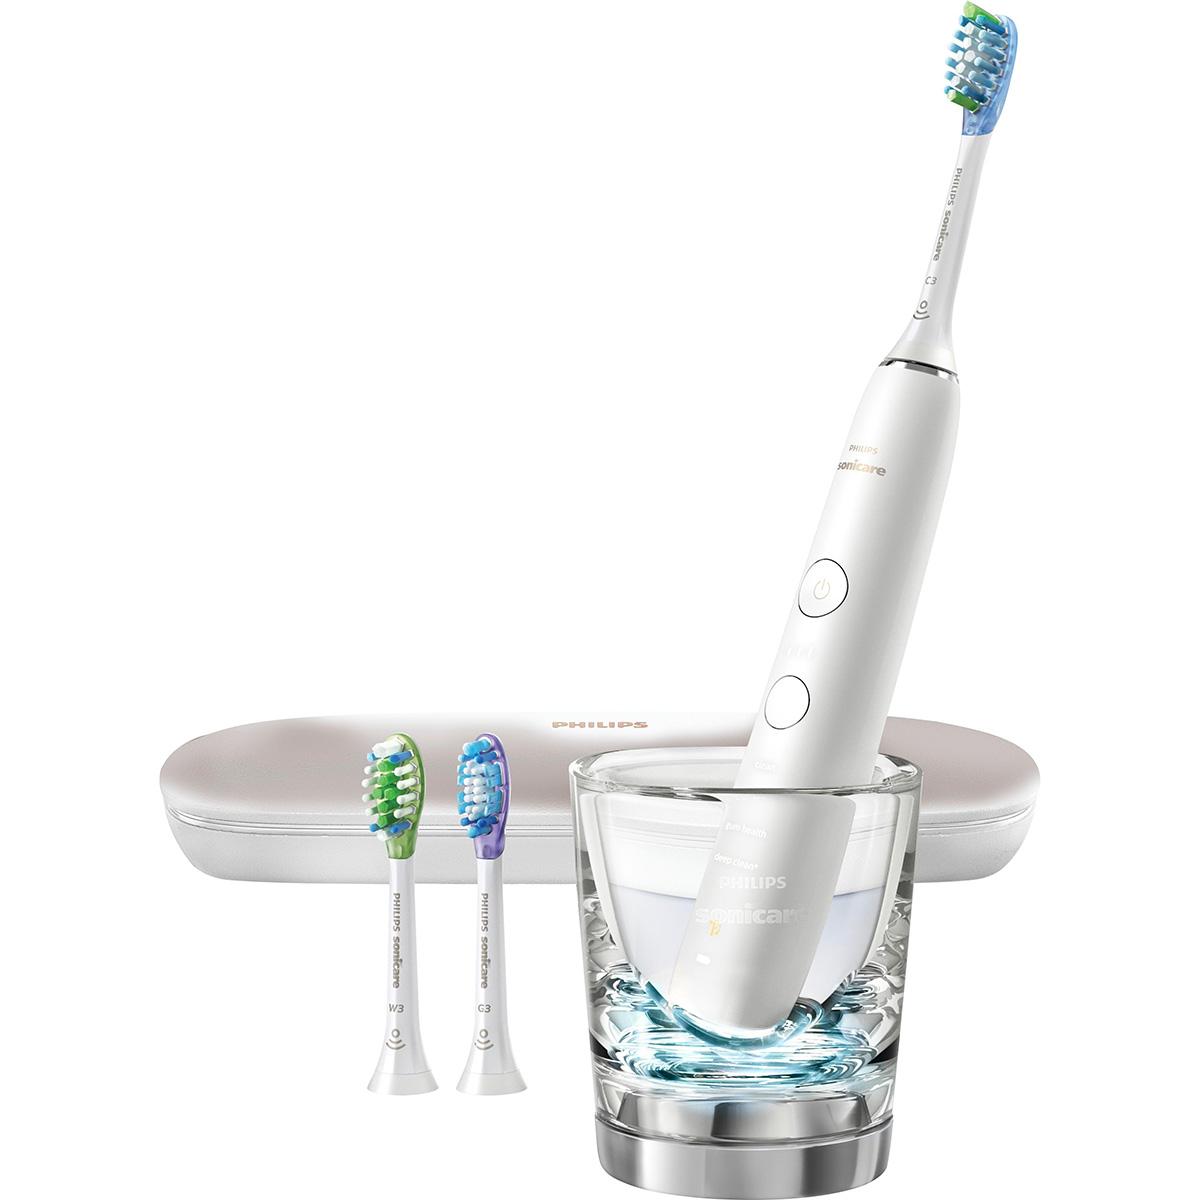 Philips Sonicare 9300 DiamondClean Smart Electronic Toothbrush for $99.99 Shipped